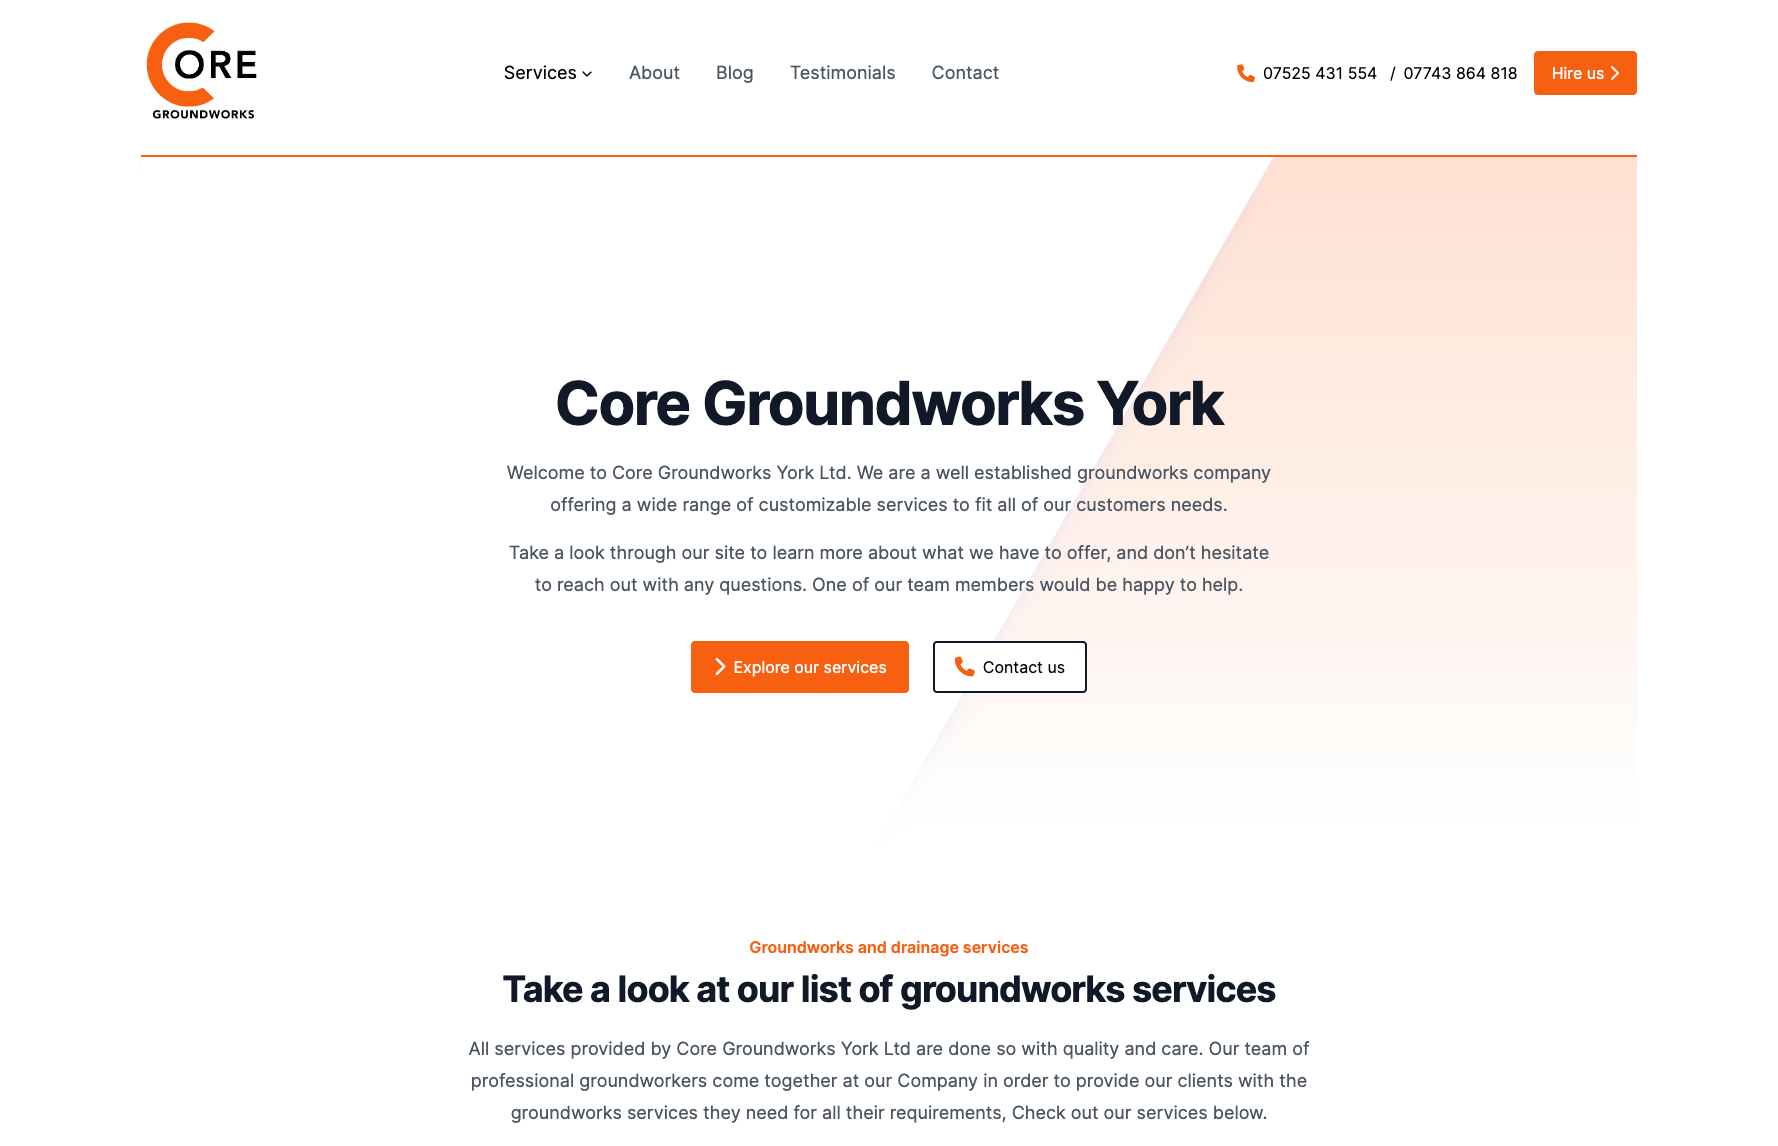 Screenshot of the Core Groundworks website